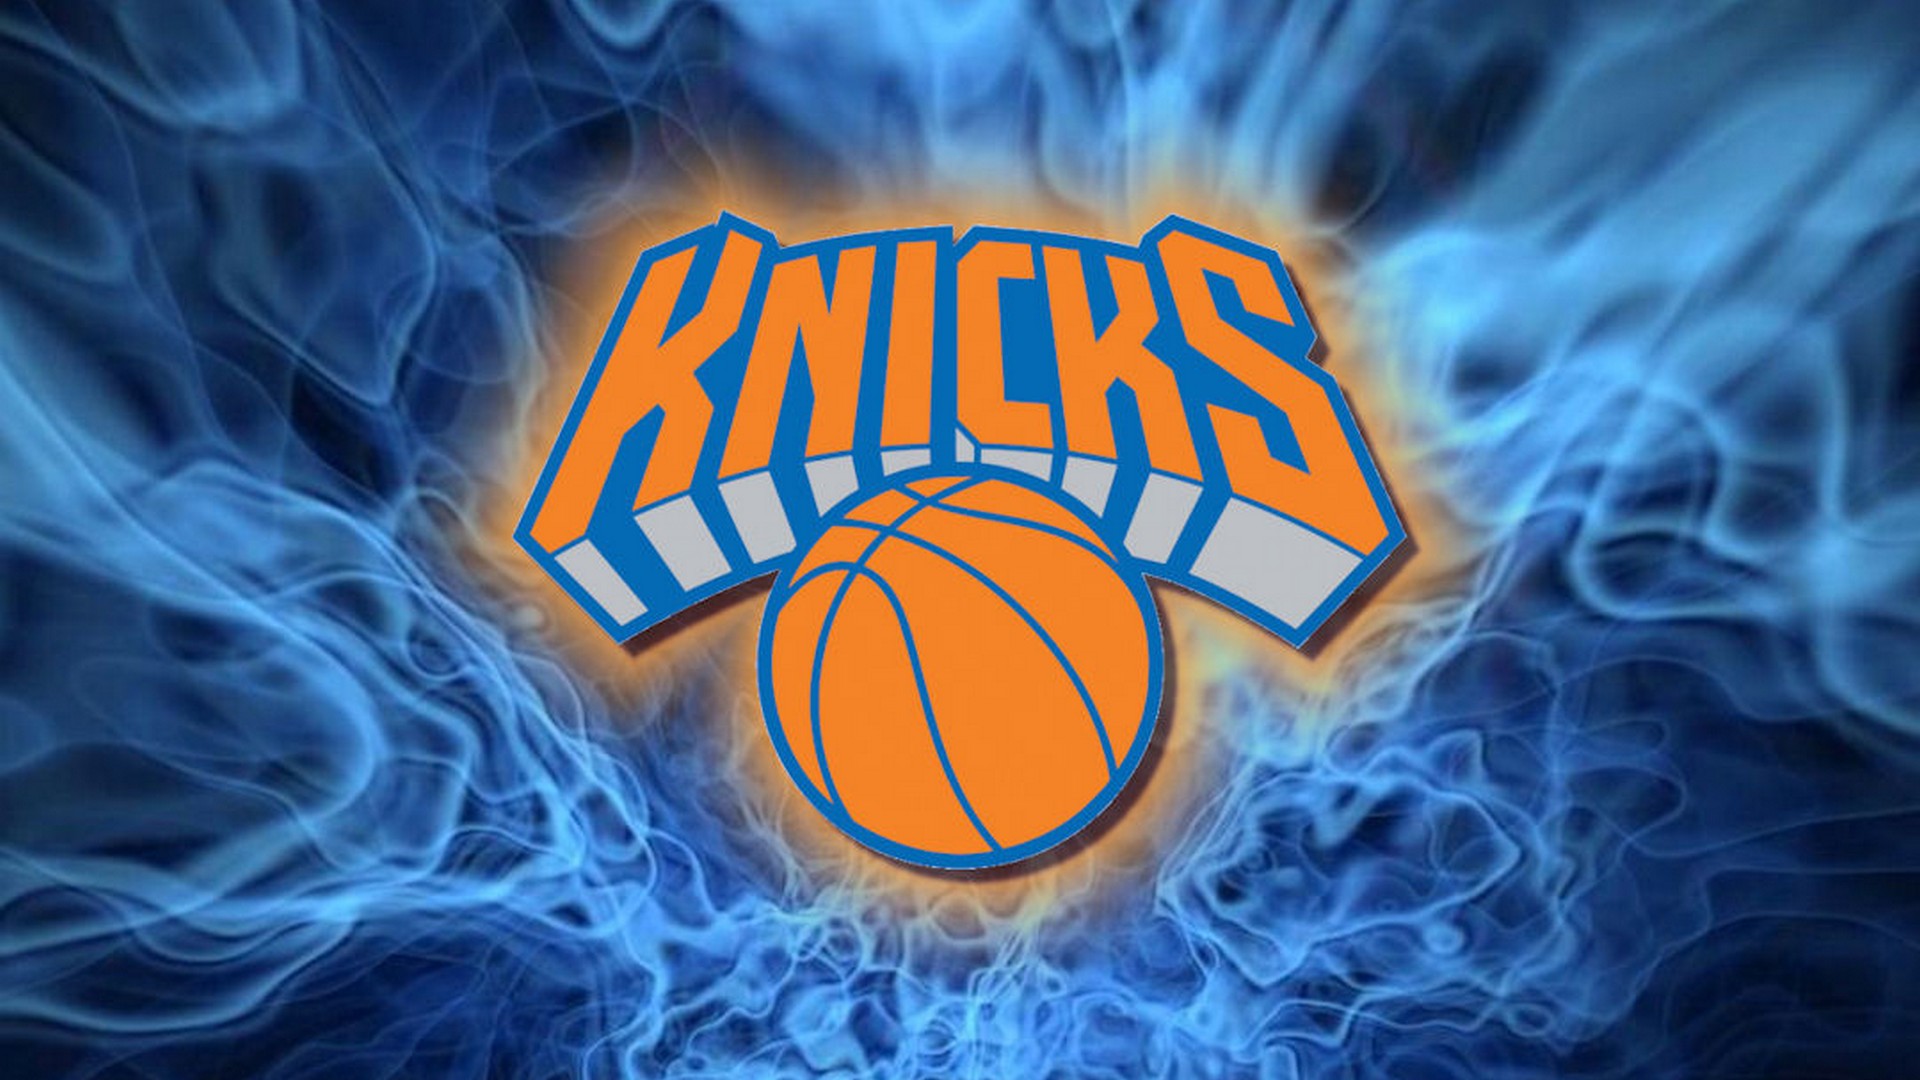 New York Knicks Wallpaper With Image Dimensions Pixel - High Resolution Ford Logo Hd - HD Wallpaper 